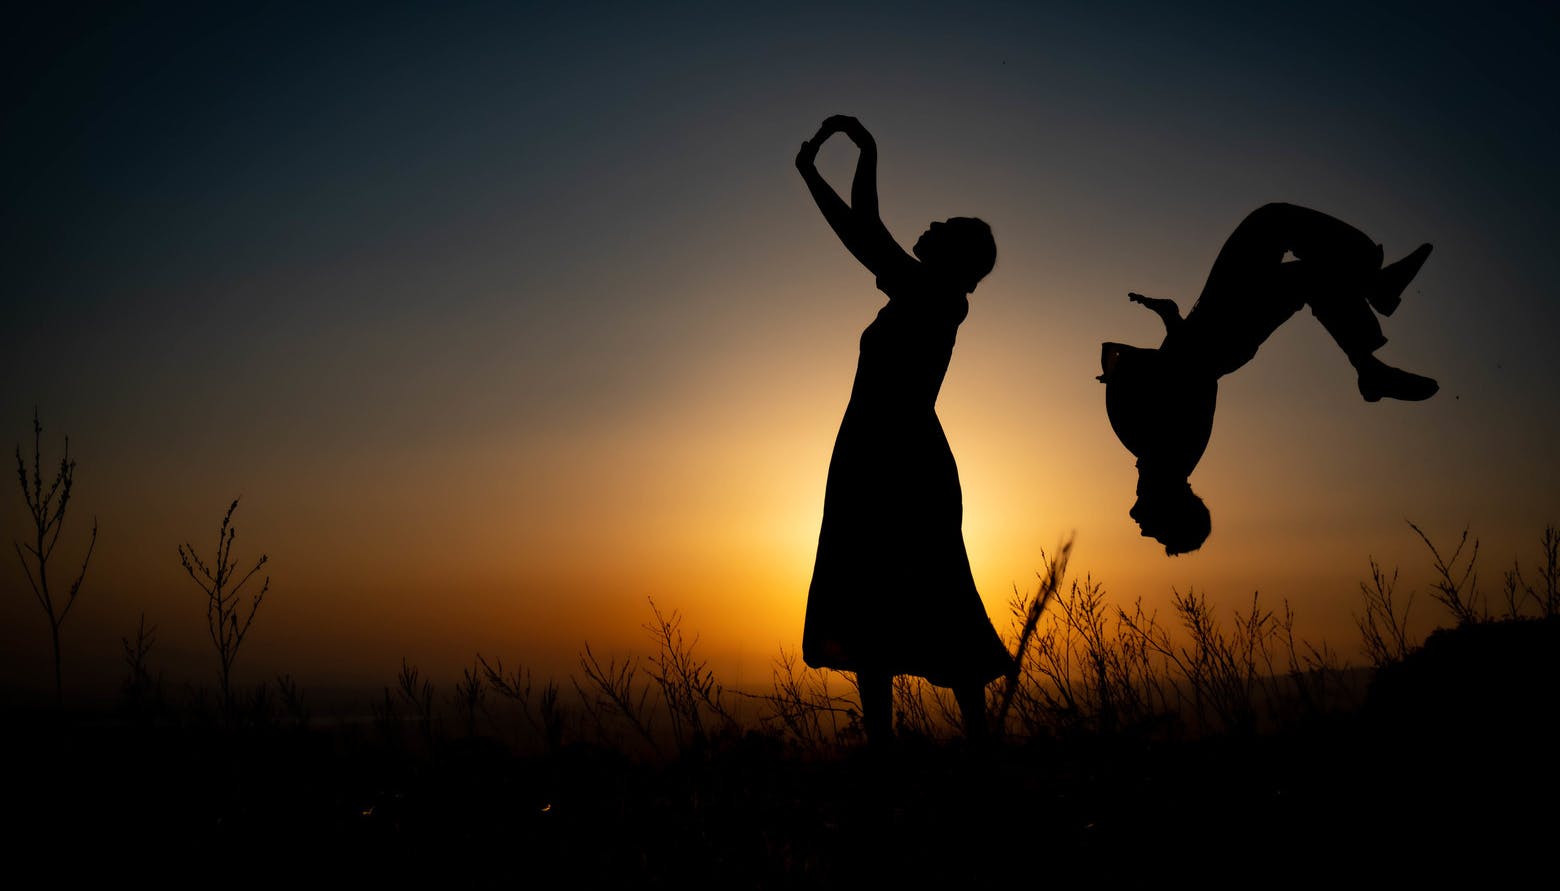 At sunset and against the light, a woman stands in the middle with her arms pointing upwards. Behind her a man is upside down doing a somersault.